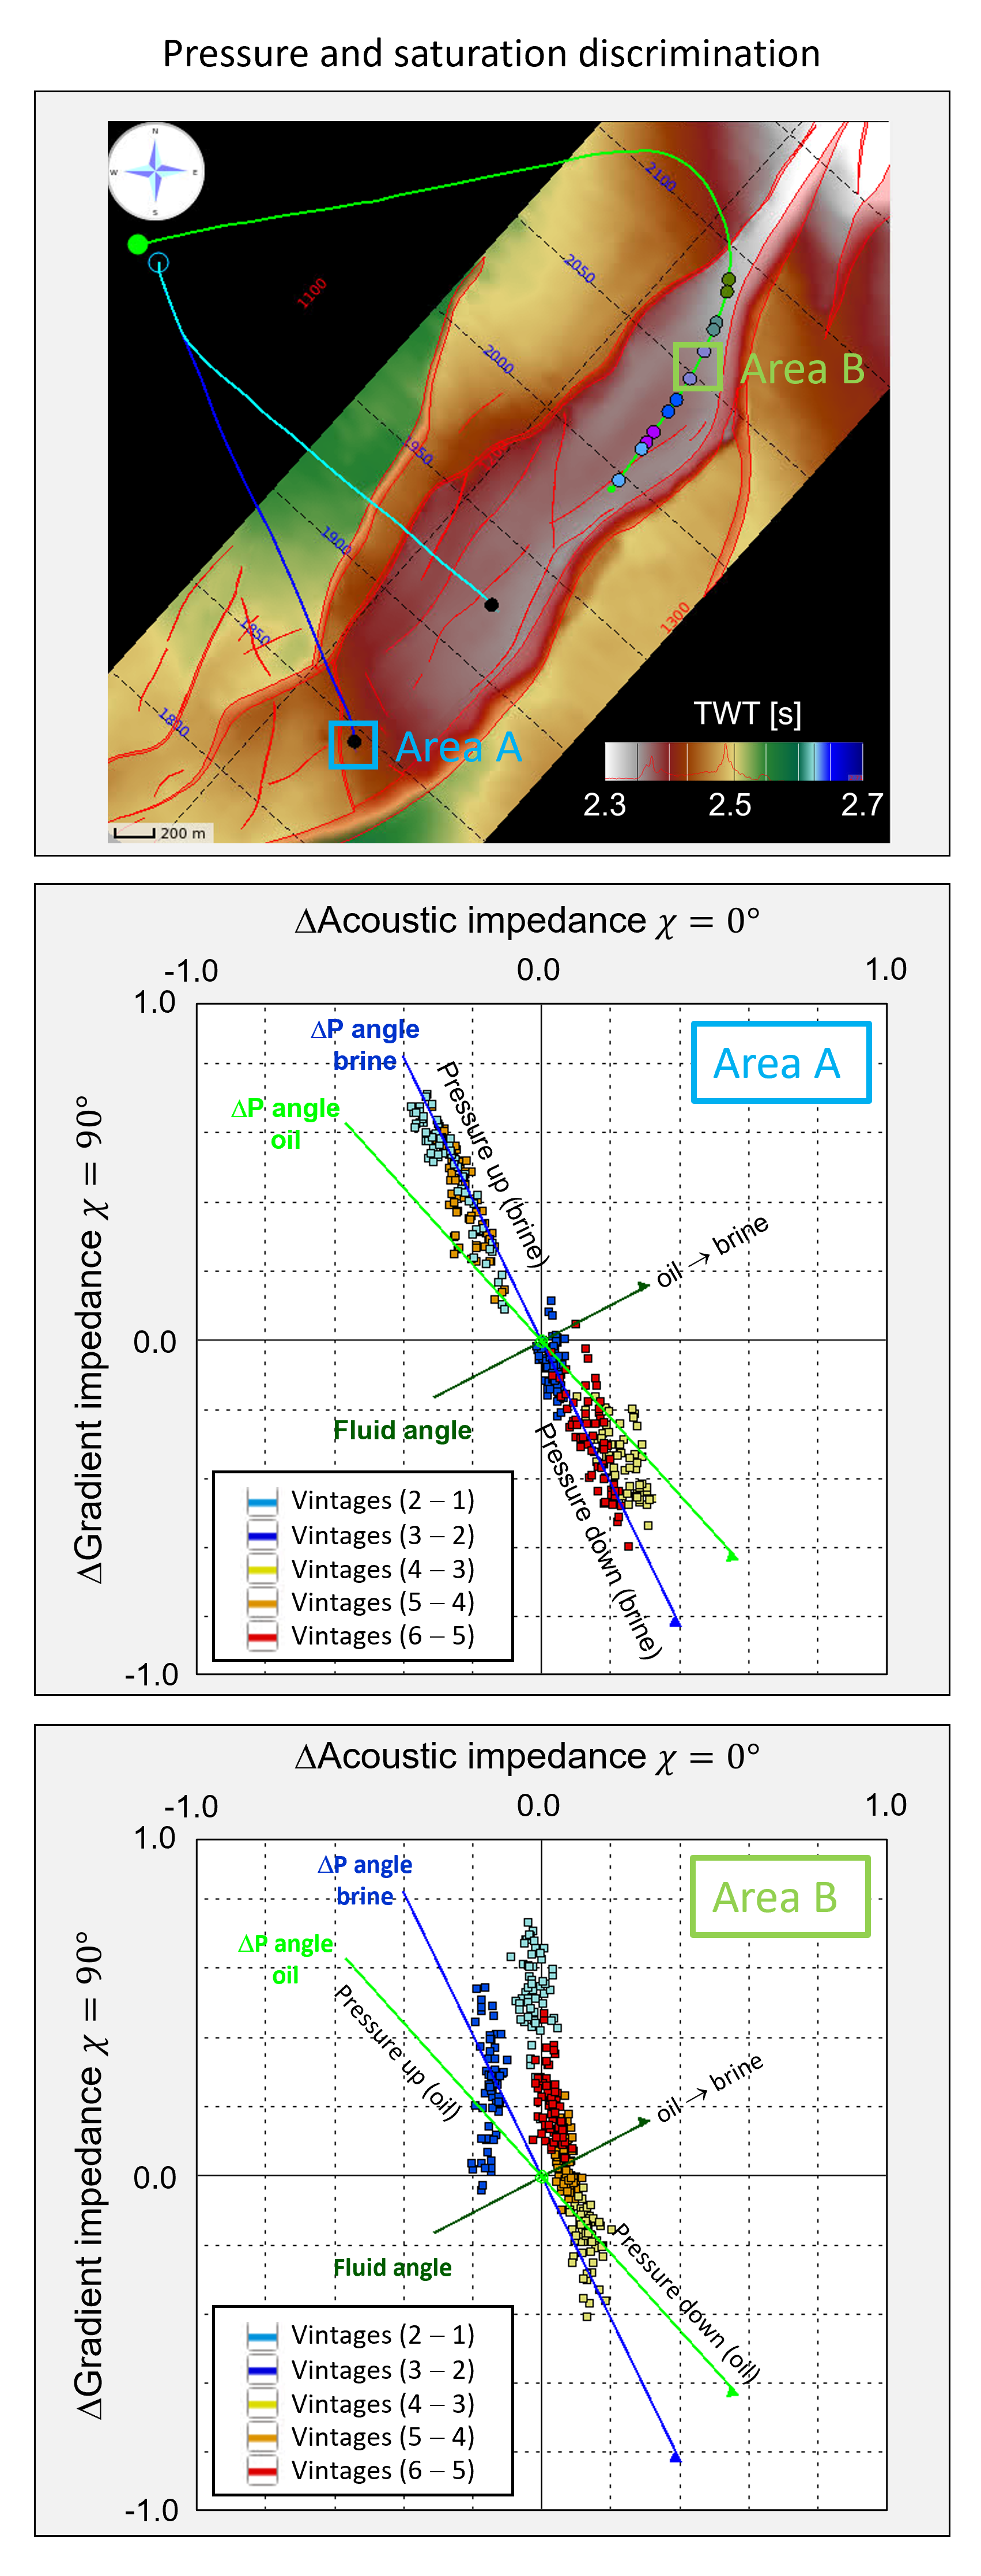 ross-plot analysis of pre-stack seismic attributes allows separation of pressure and saturation change